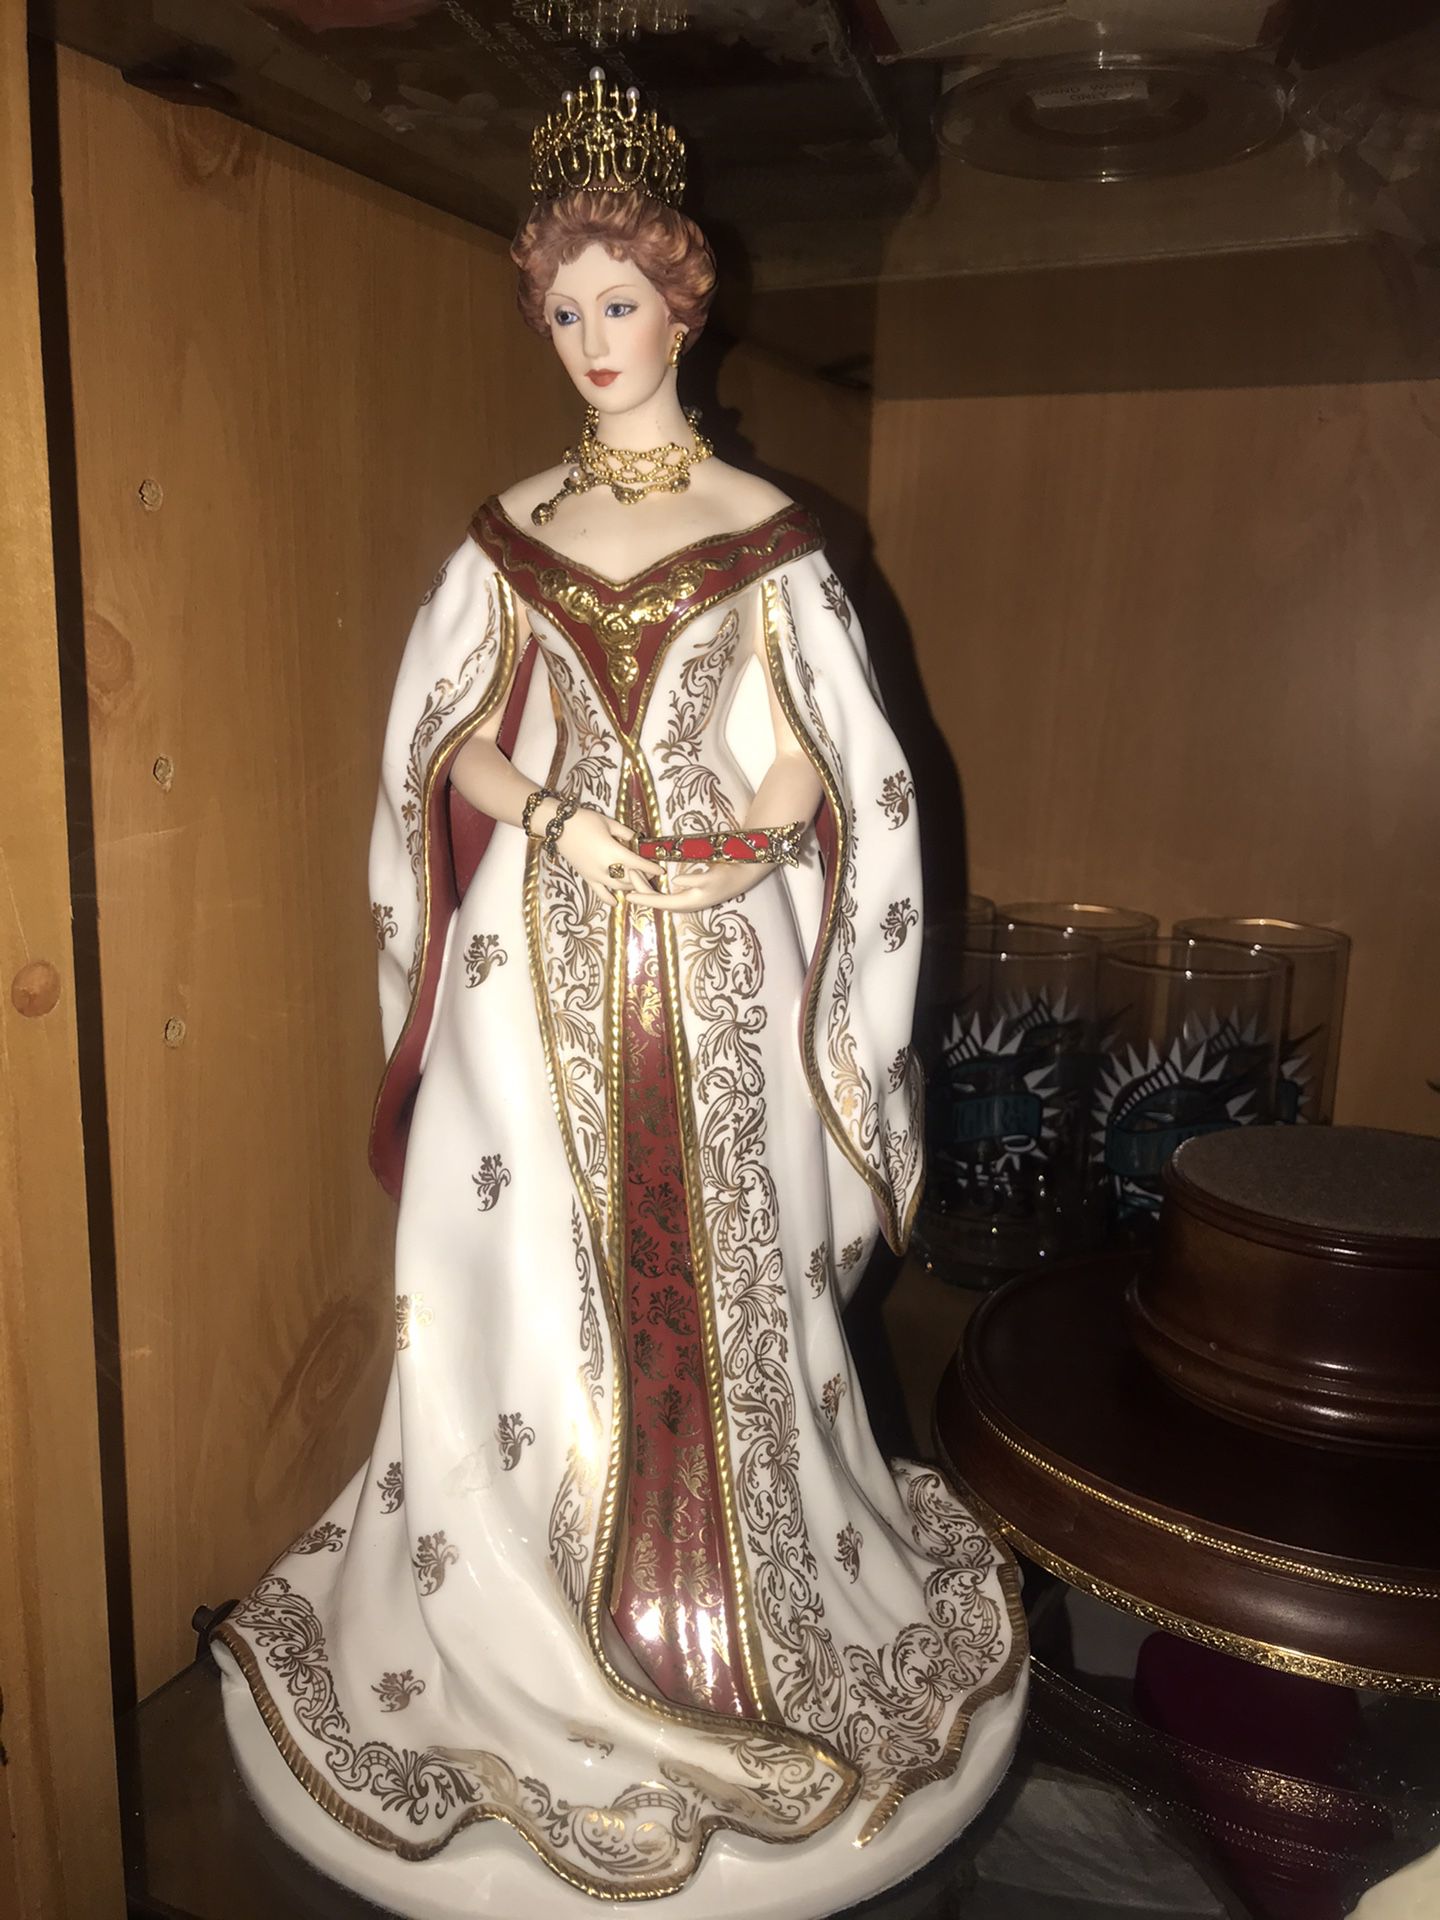 Empress Alexandra 1989 Franklin Mint The House of Faberge 24kt gold Collectible Fine Hand Painted Sculpture Porcelain $150 firm